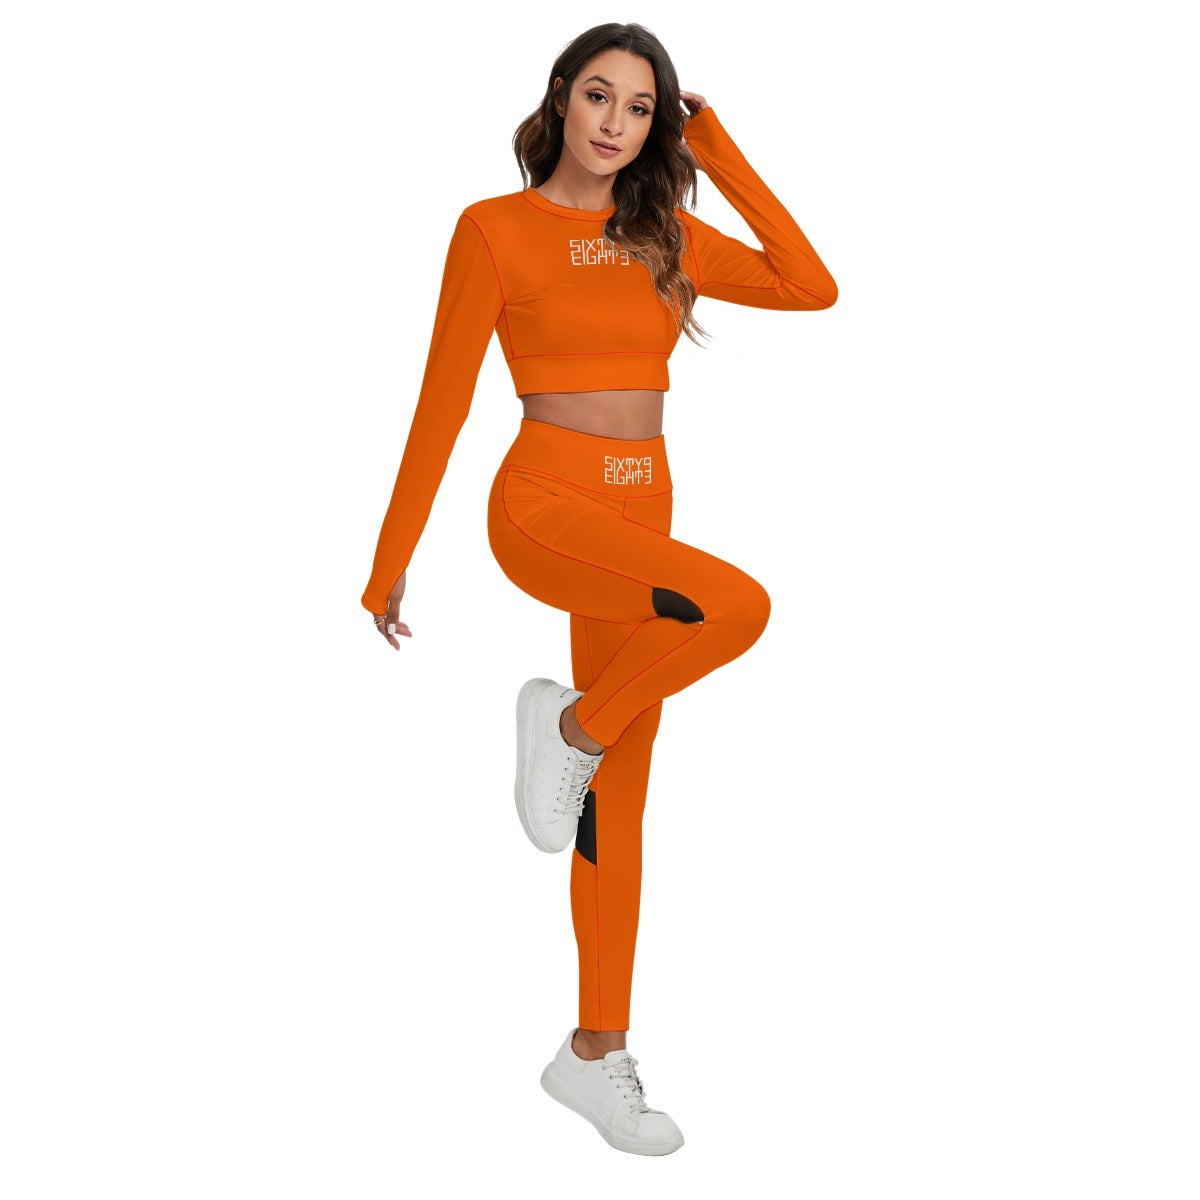 Sixty Eight 93 Logo White Orange Women's Sport Set With Backless Top And Leggings